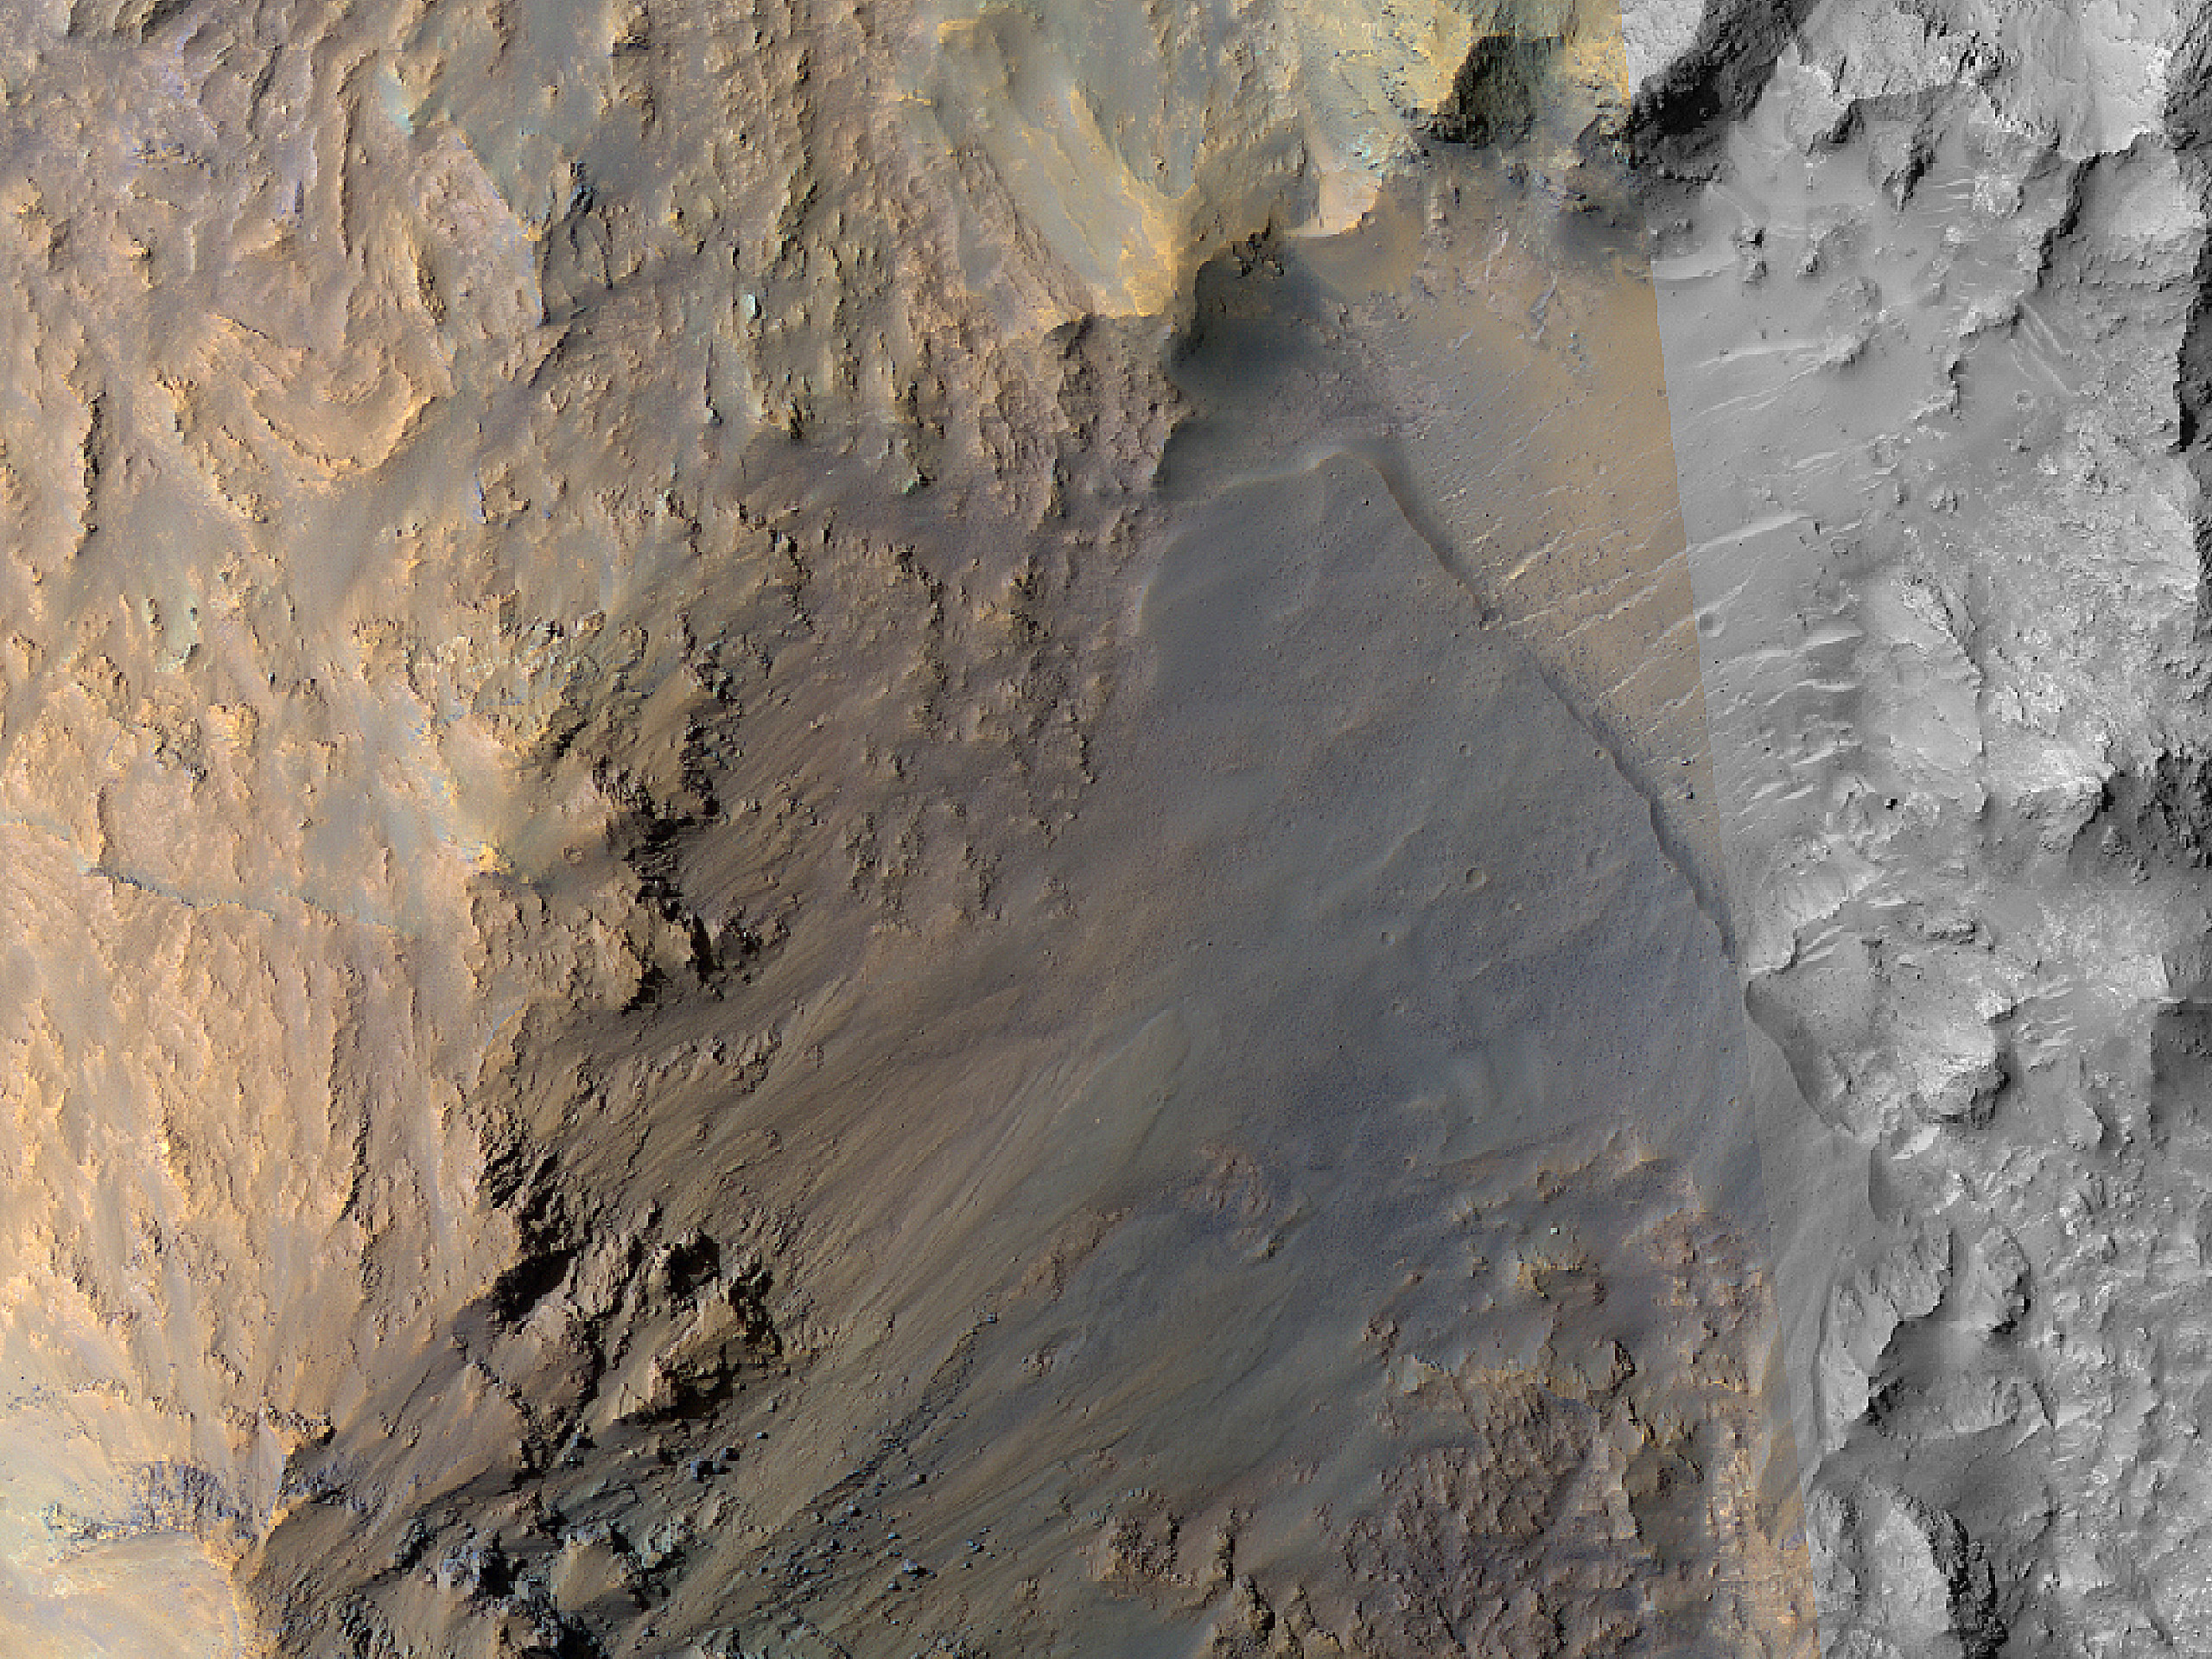 Possible Opaline Silica in the Central Uplift of Elorza Crater